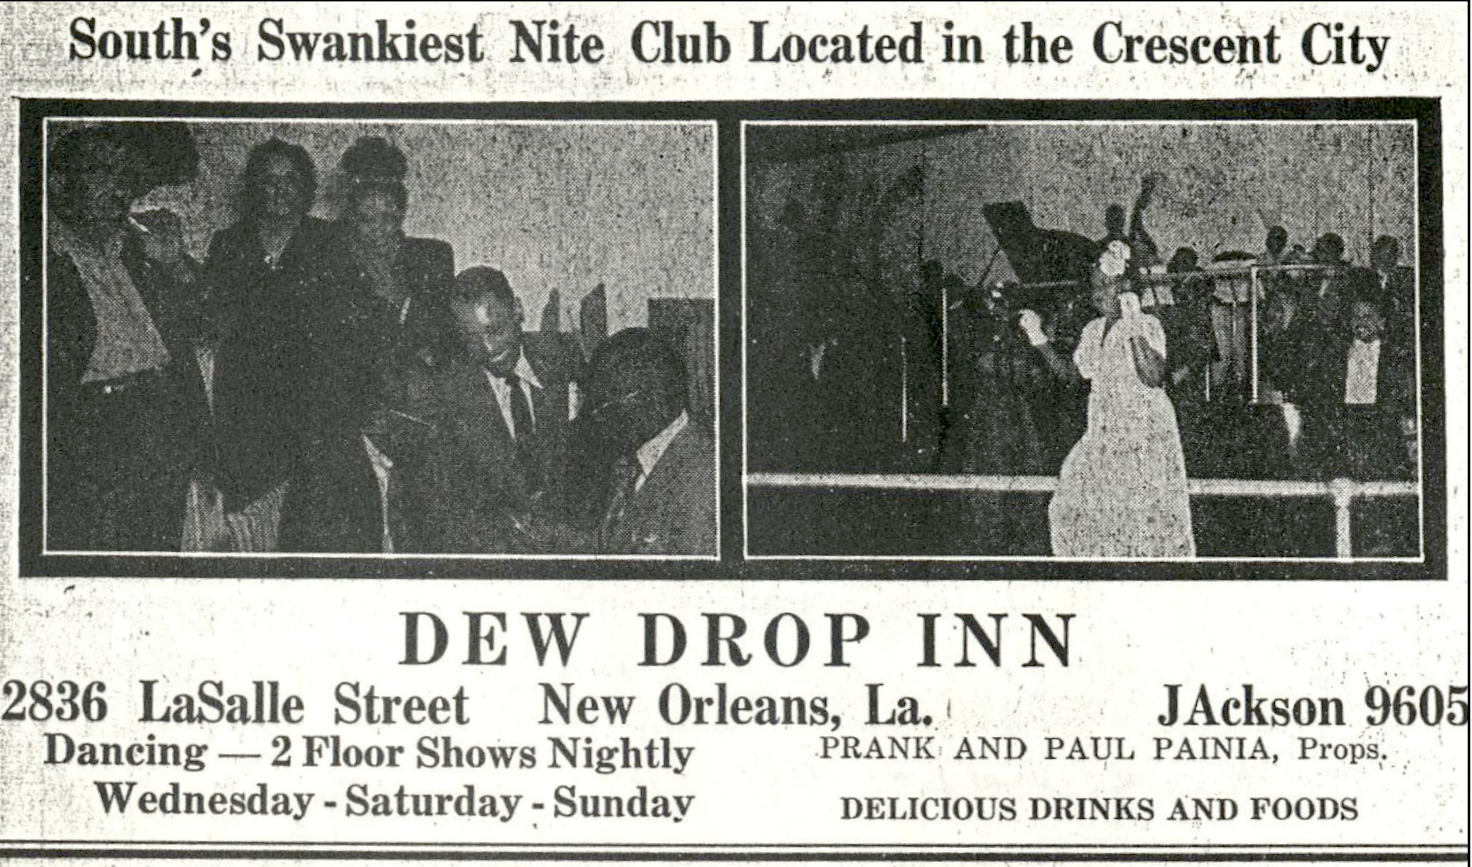 The renovation of the famous Dew Drop Inn is officially underway ...